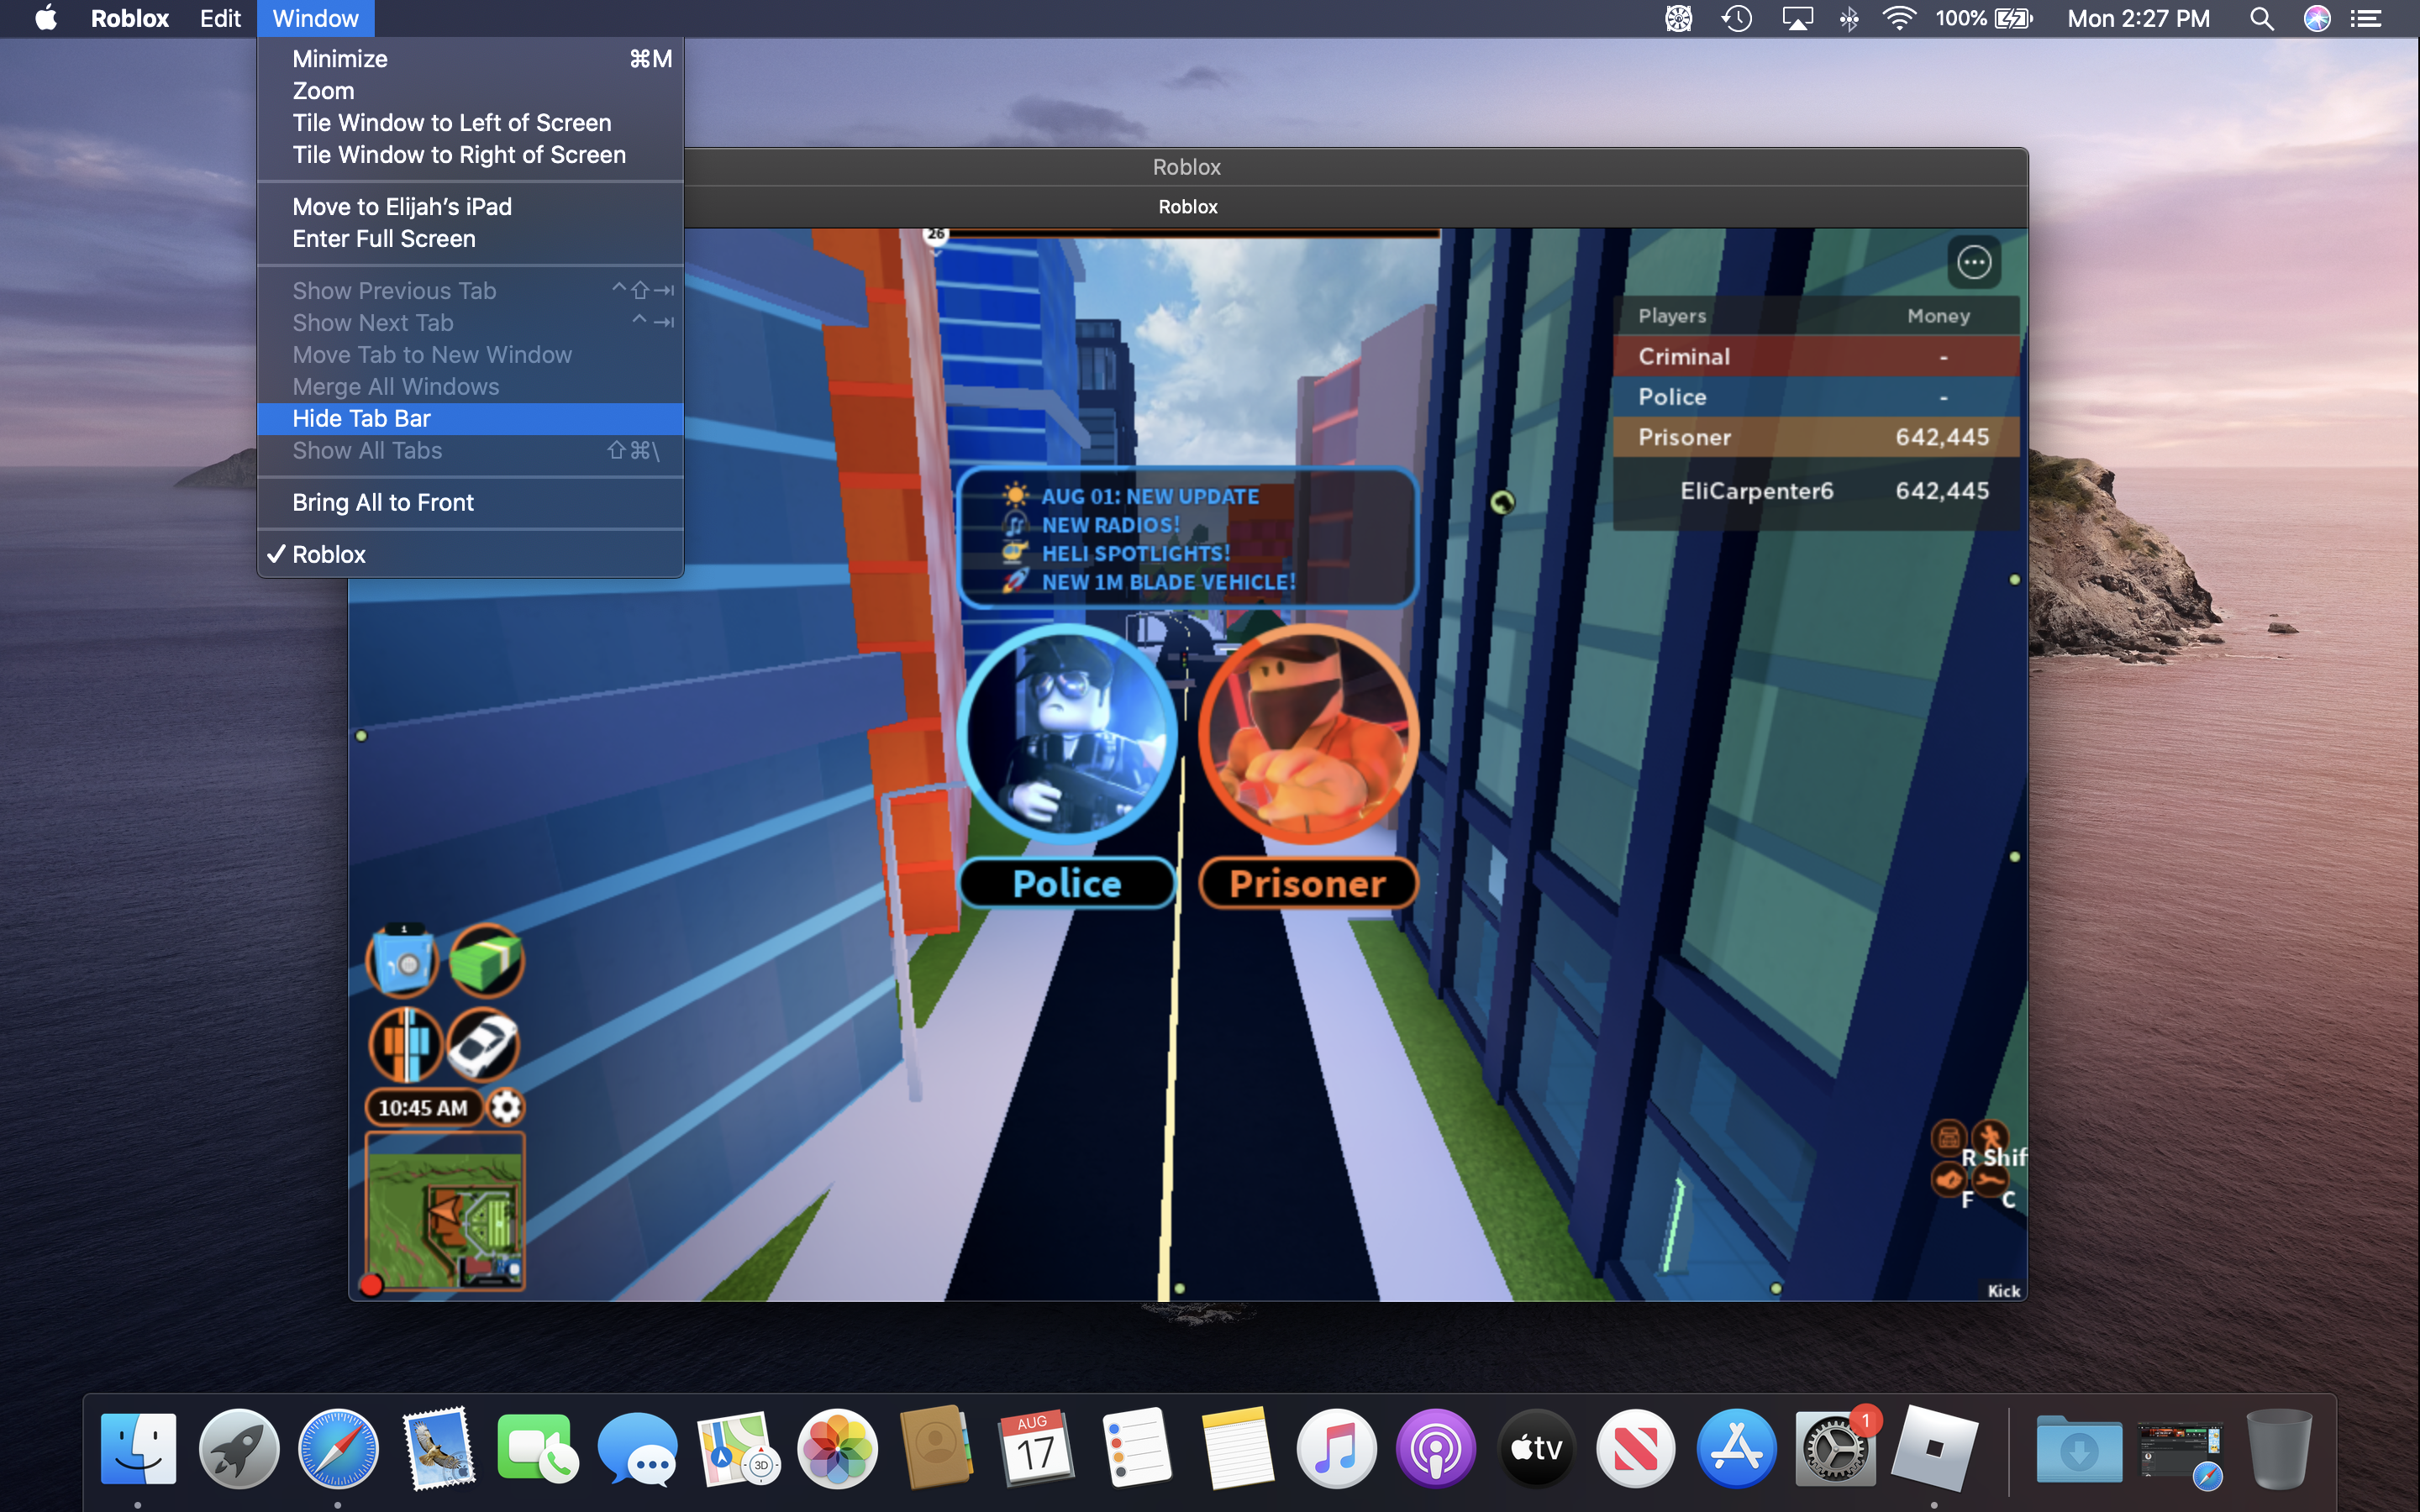 How to Control Roblox on Mac? 3